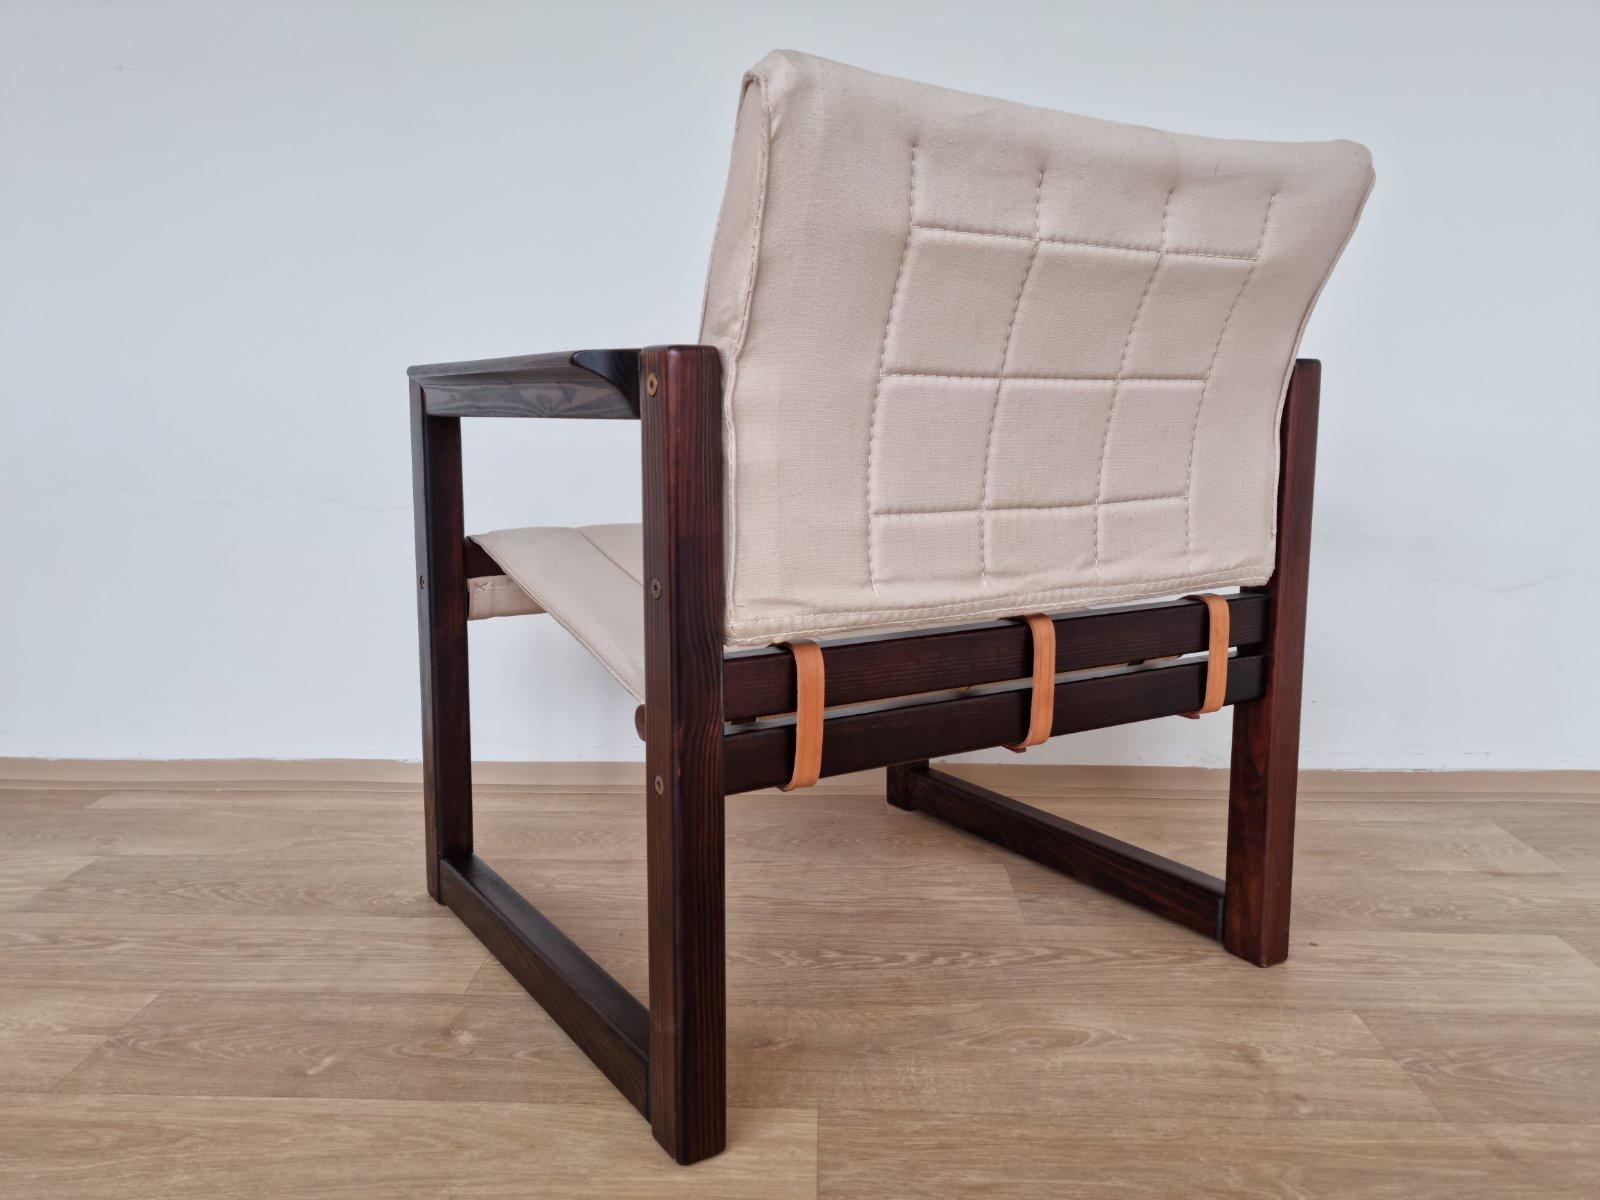 - 1980s
- Designer: Karin Mobring for Ikea
- Model Diana safari chair
- Never used, only unpacked and put together
- Textile (canvas)
- Dimensions of table: 62 x 28 x 57 cm.